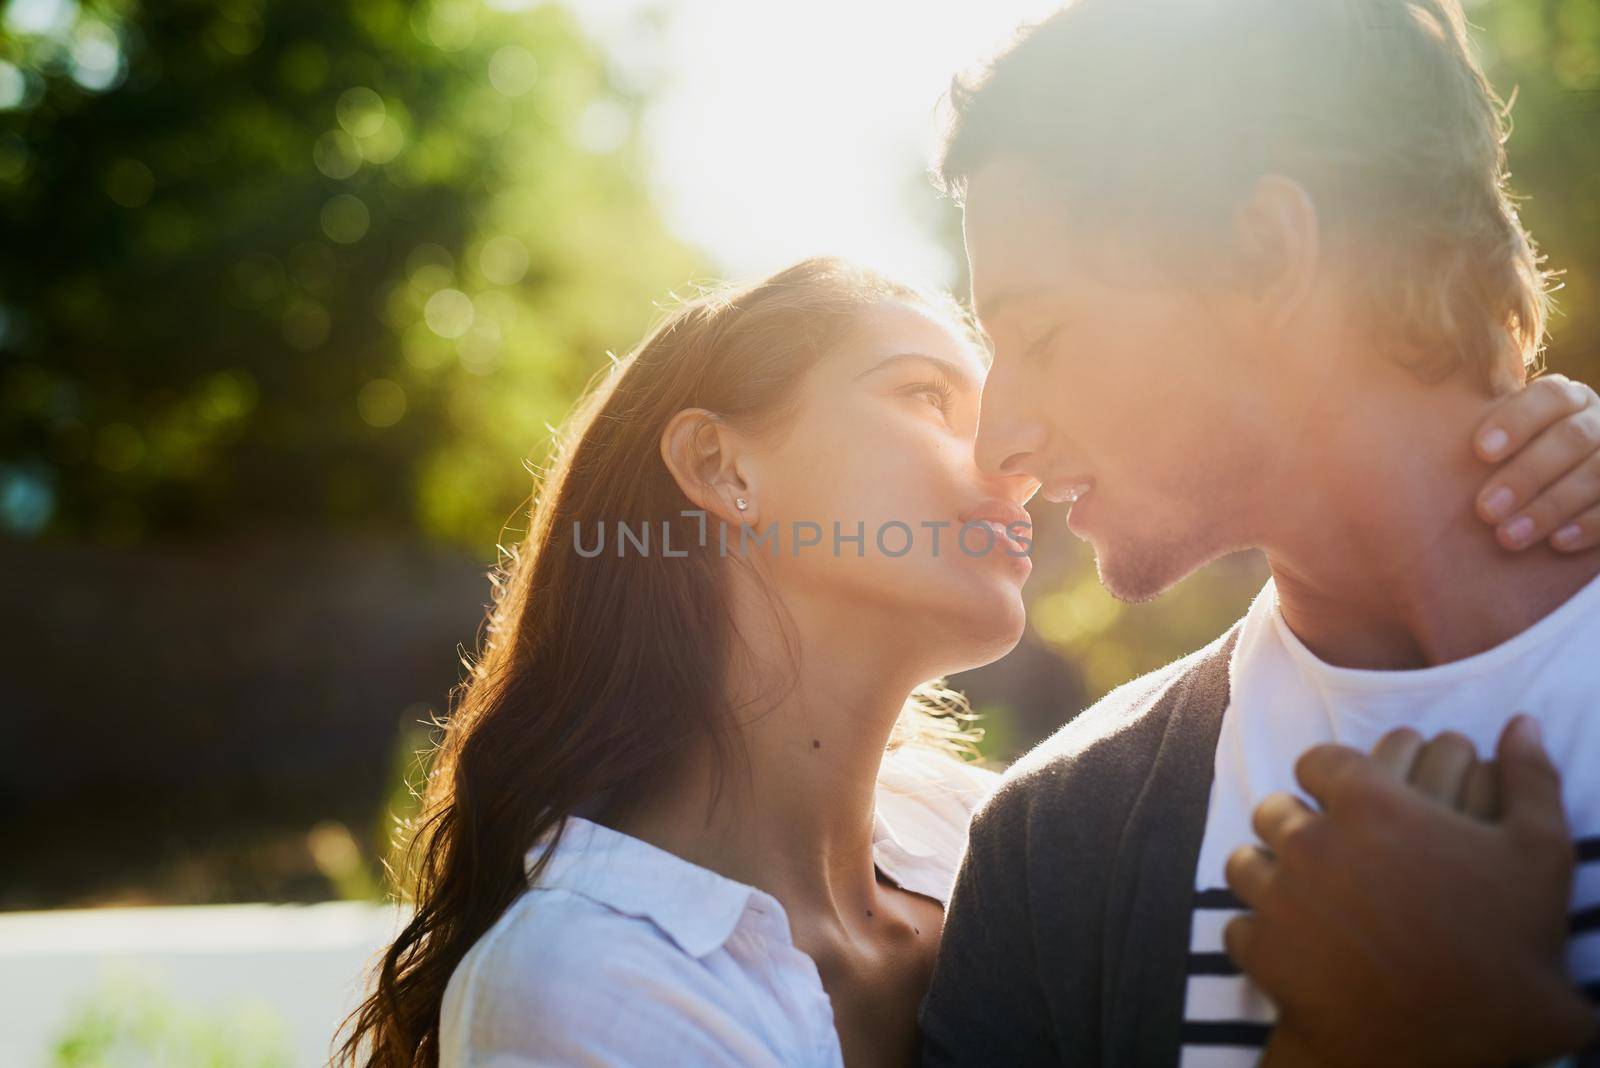 You are my only sunshine. an affectionate young couple bonding outdoors